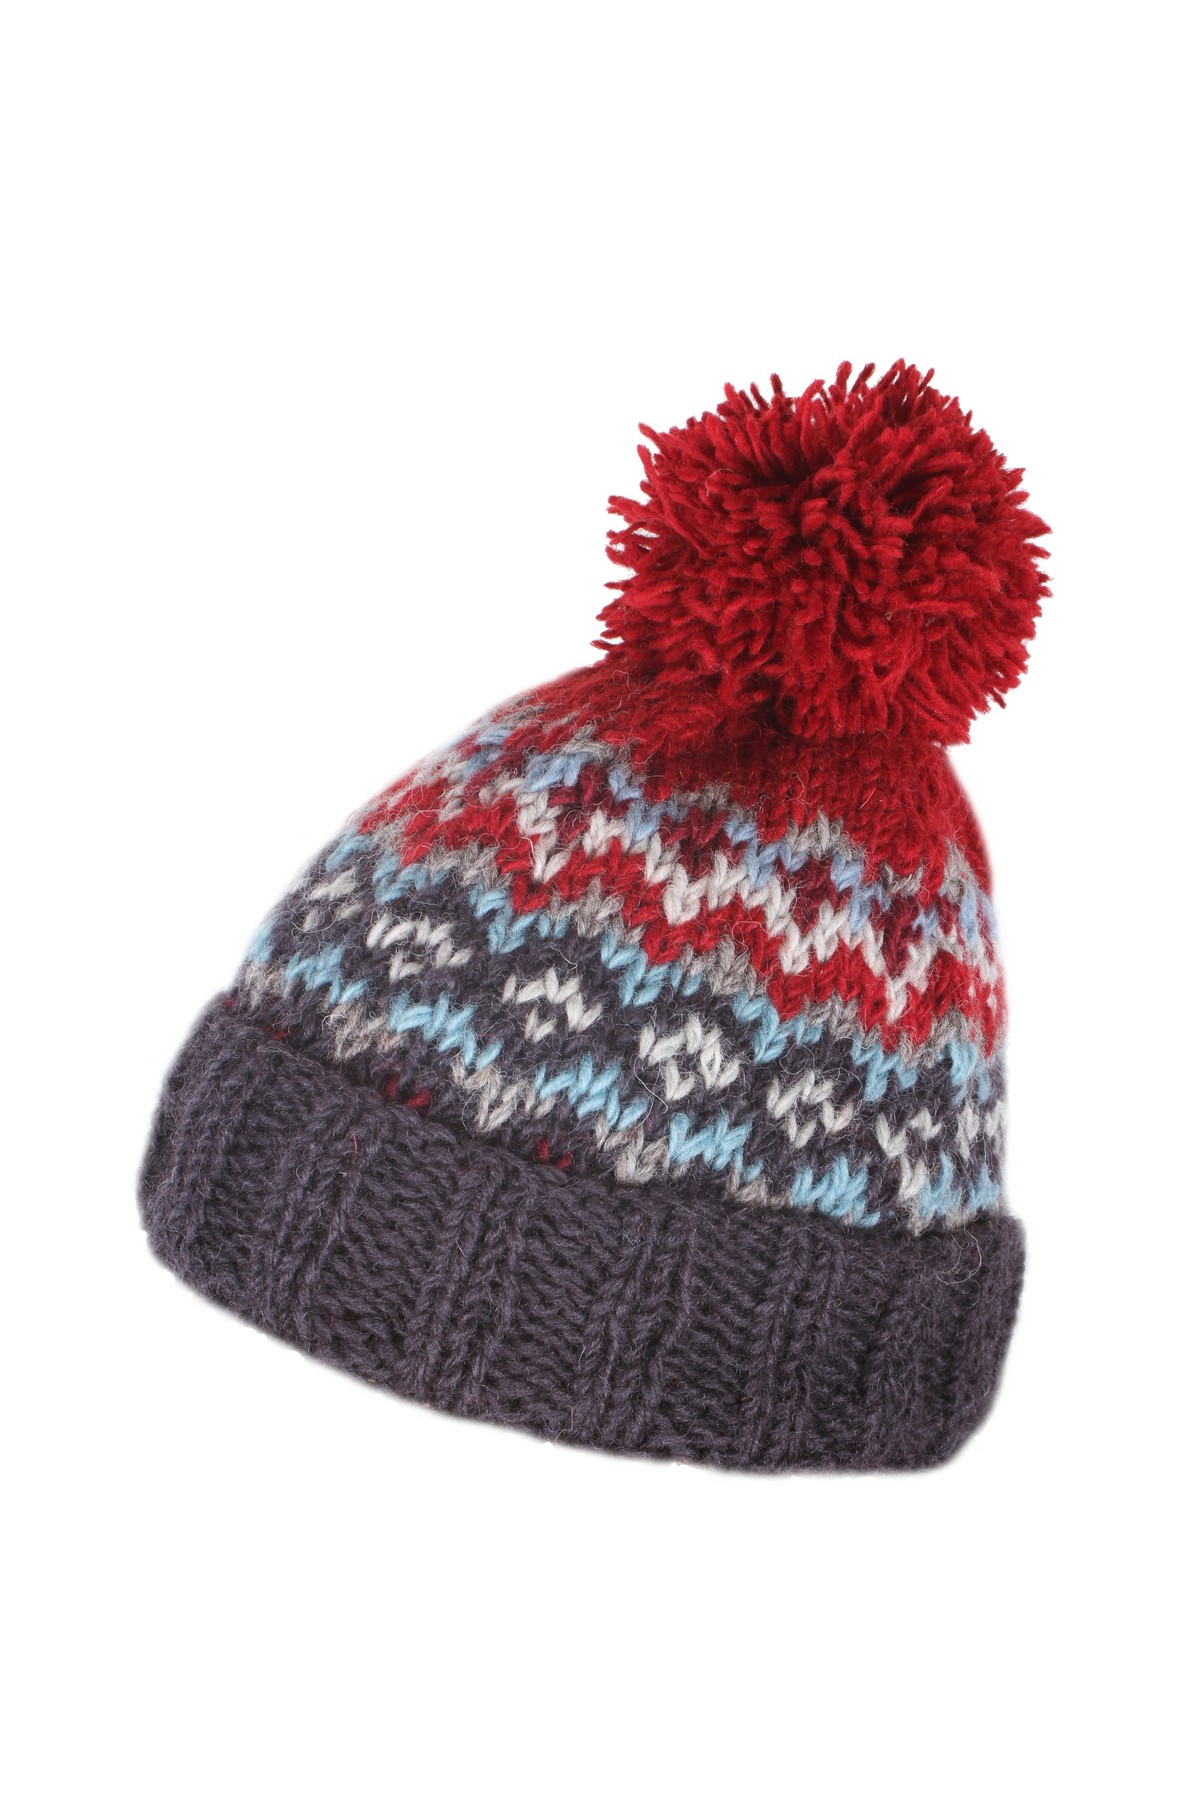 Pachamama Mens Clifden Bobble Beanie in Red